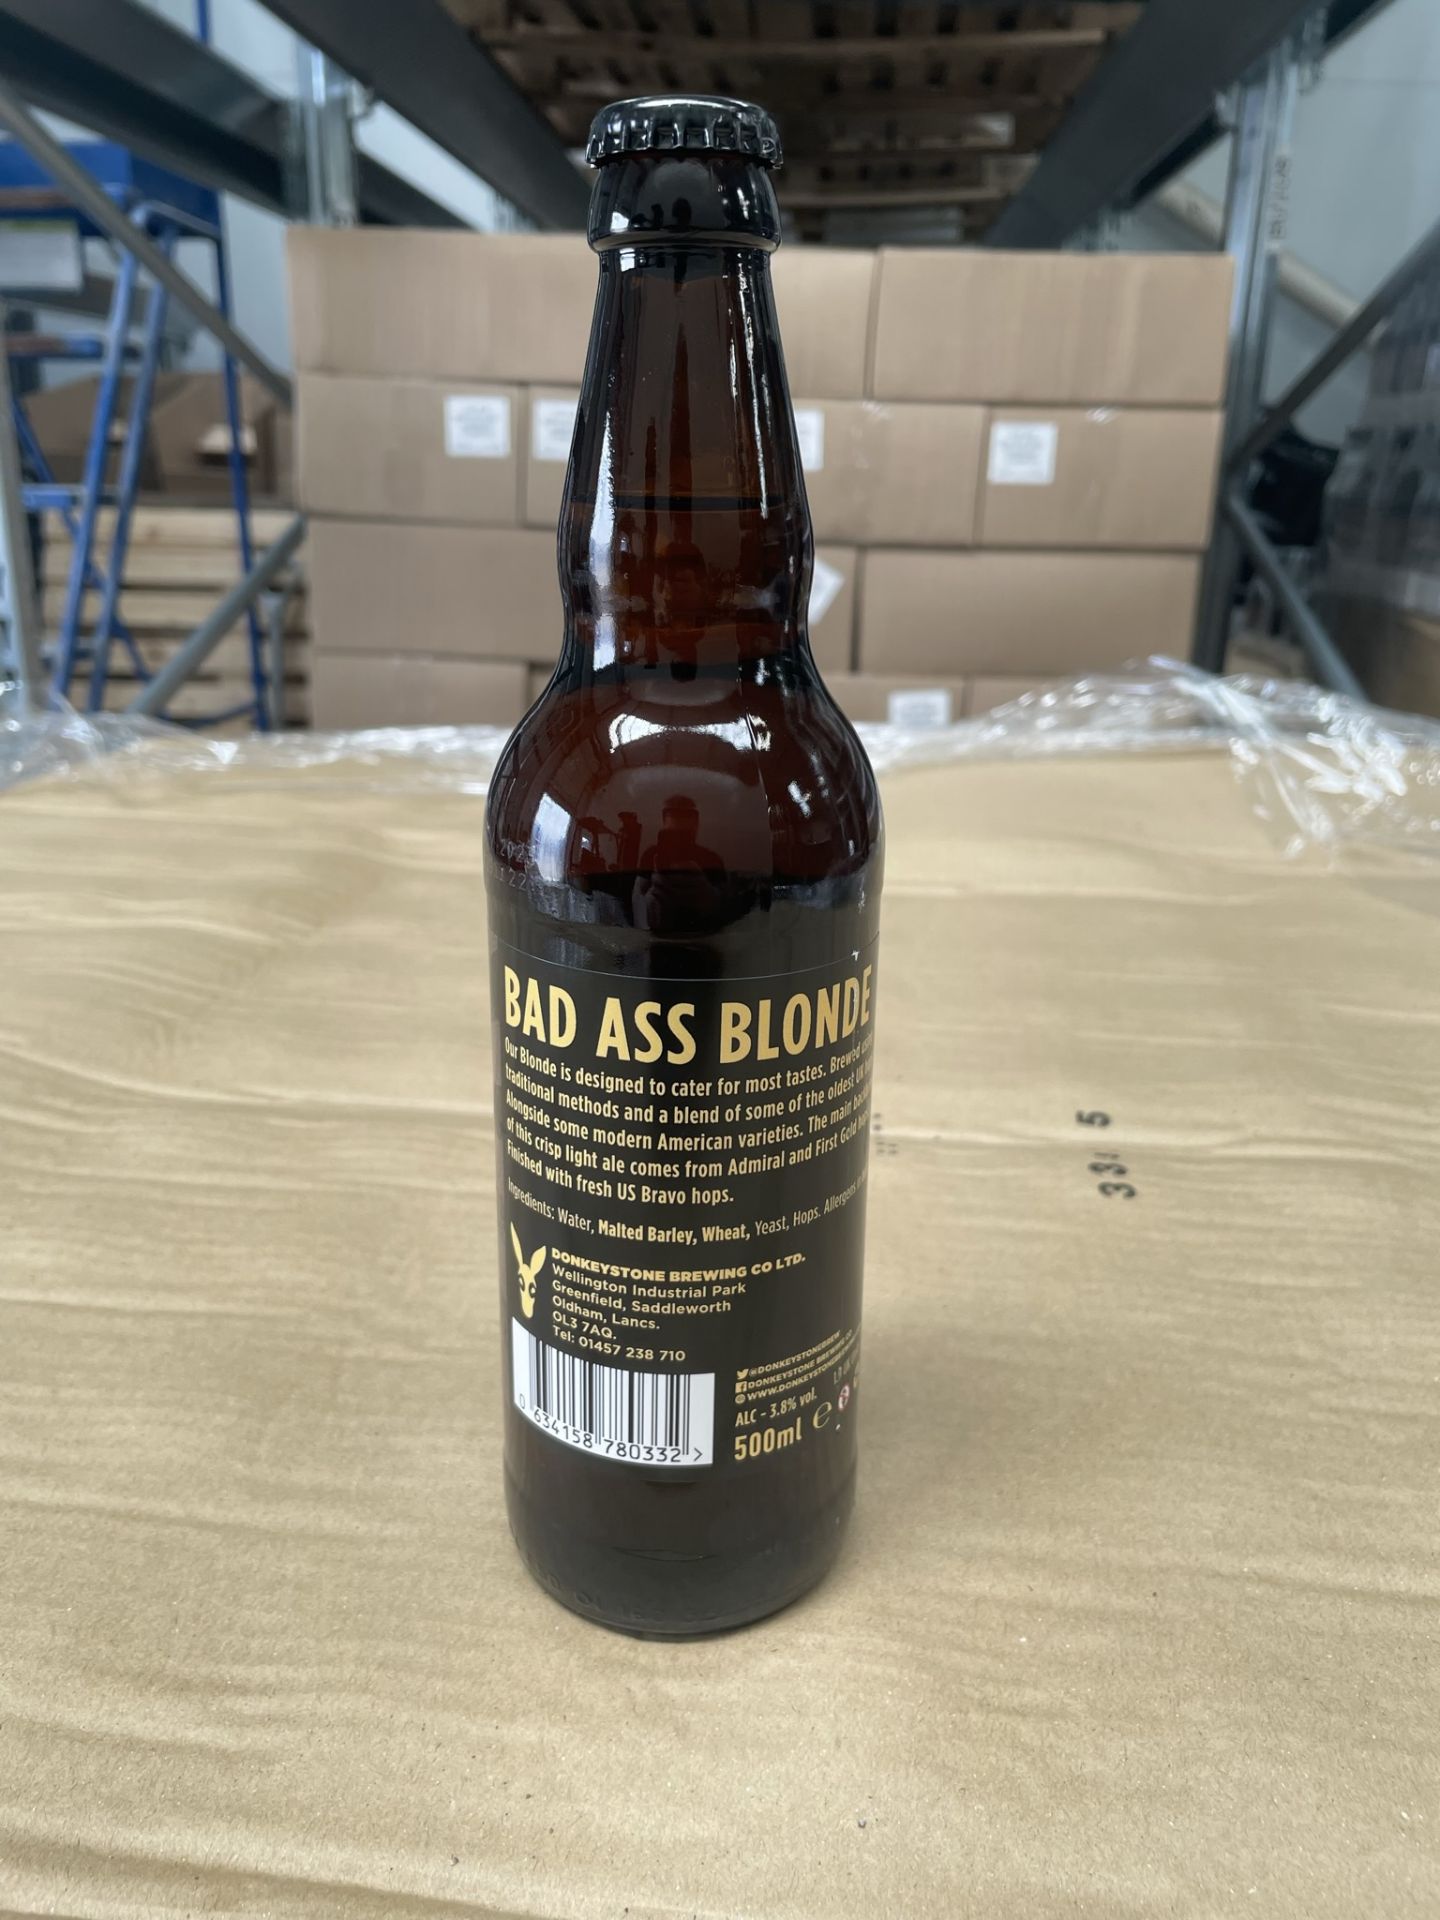 Approximately 672 x 500ml Bottles of DonkeyStone Brewing Co 'Bad Ass Blonde' Blone Ale | BB: Nov 202 - Image 2 of 3